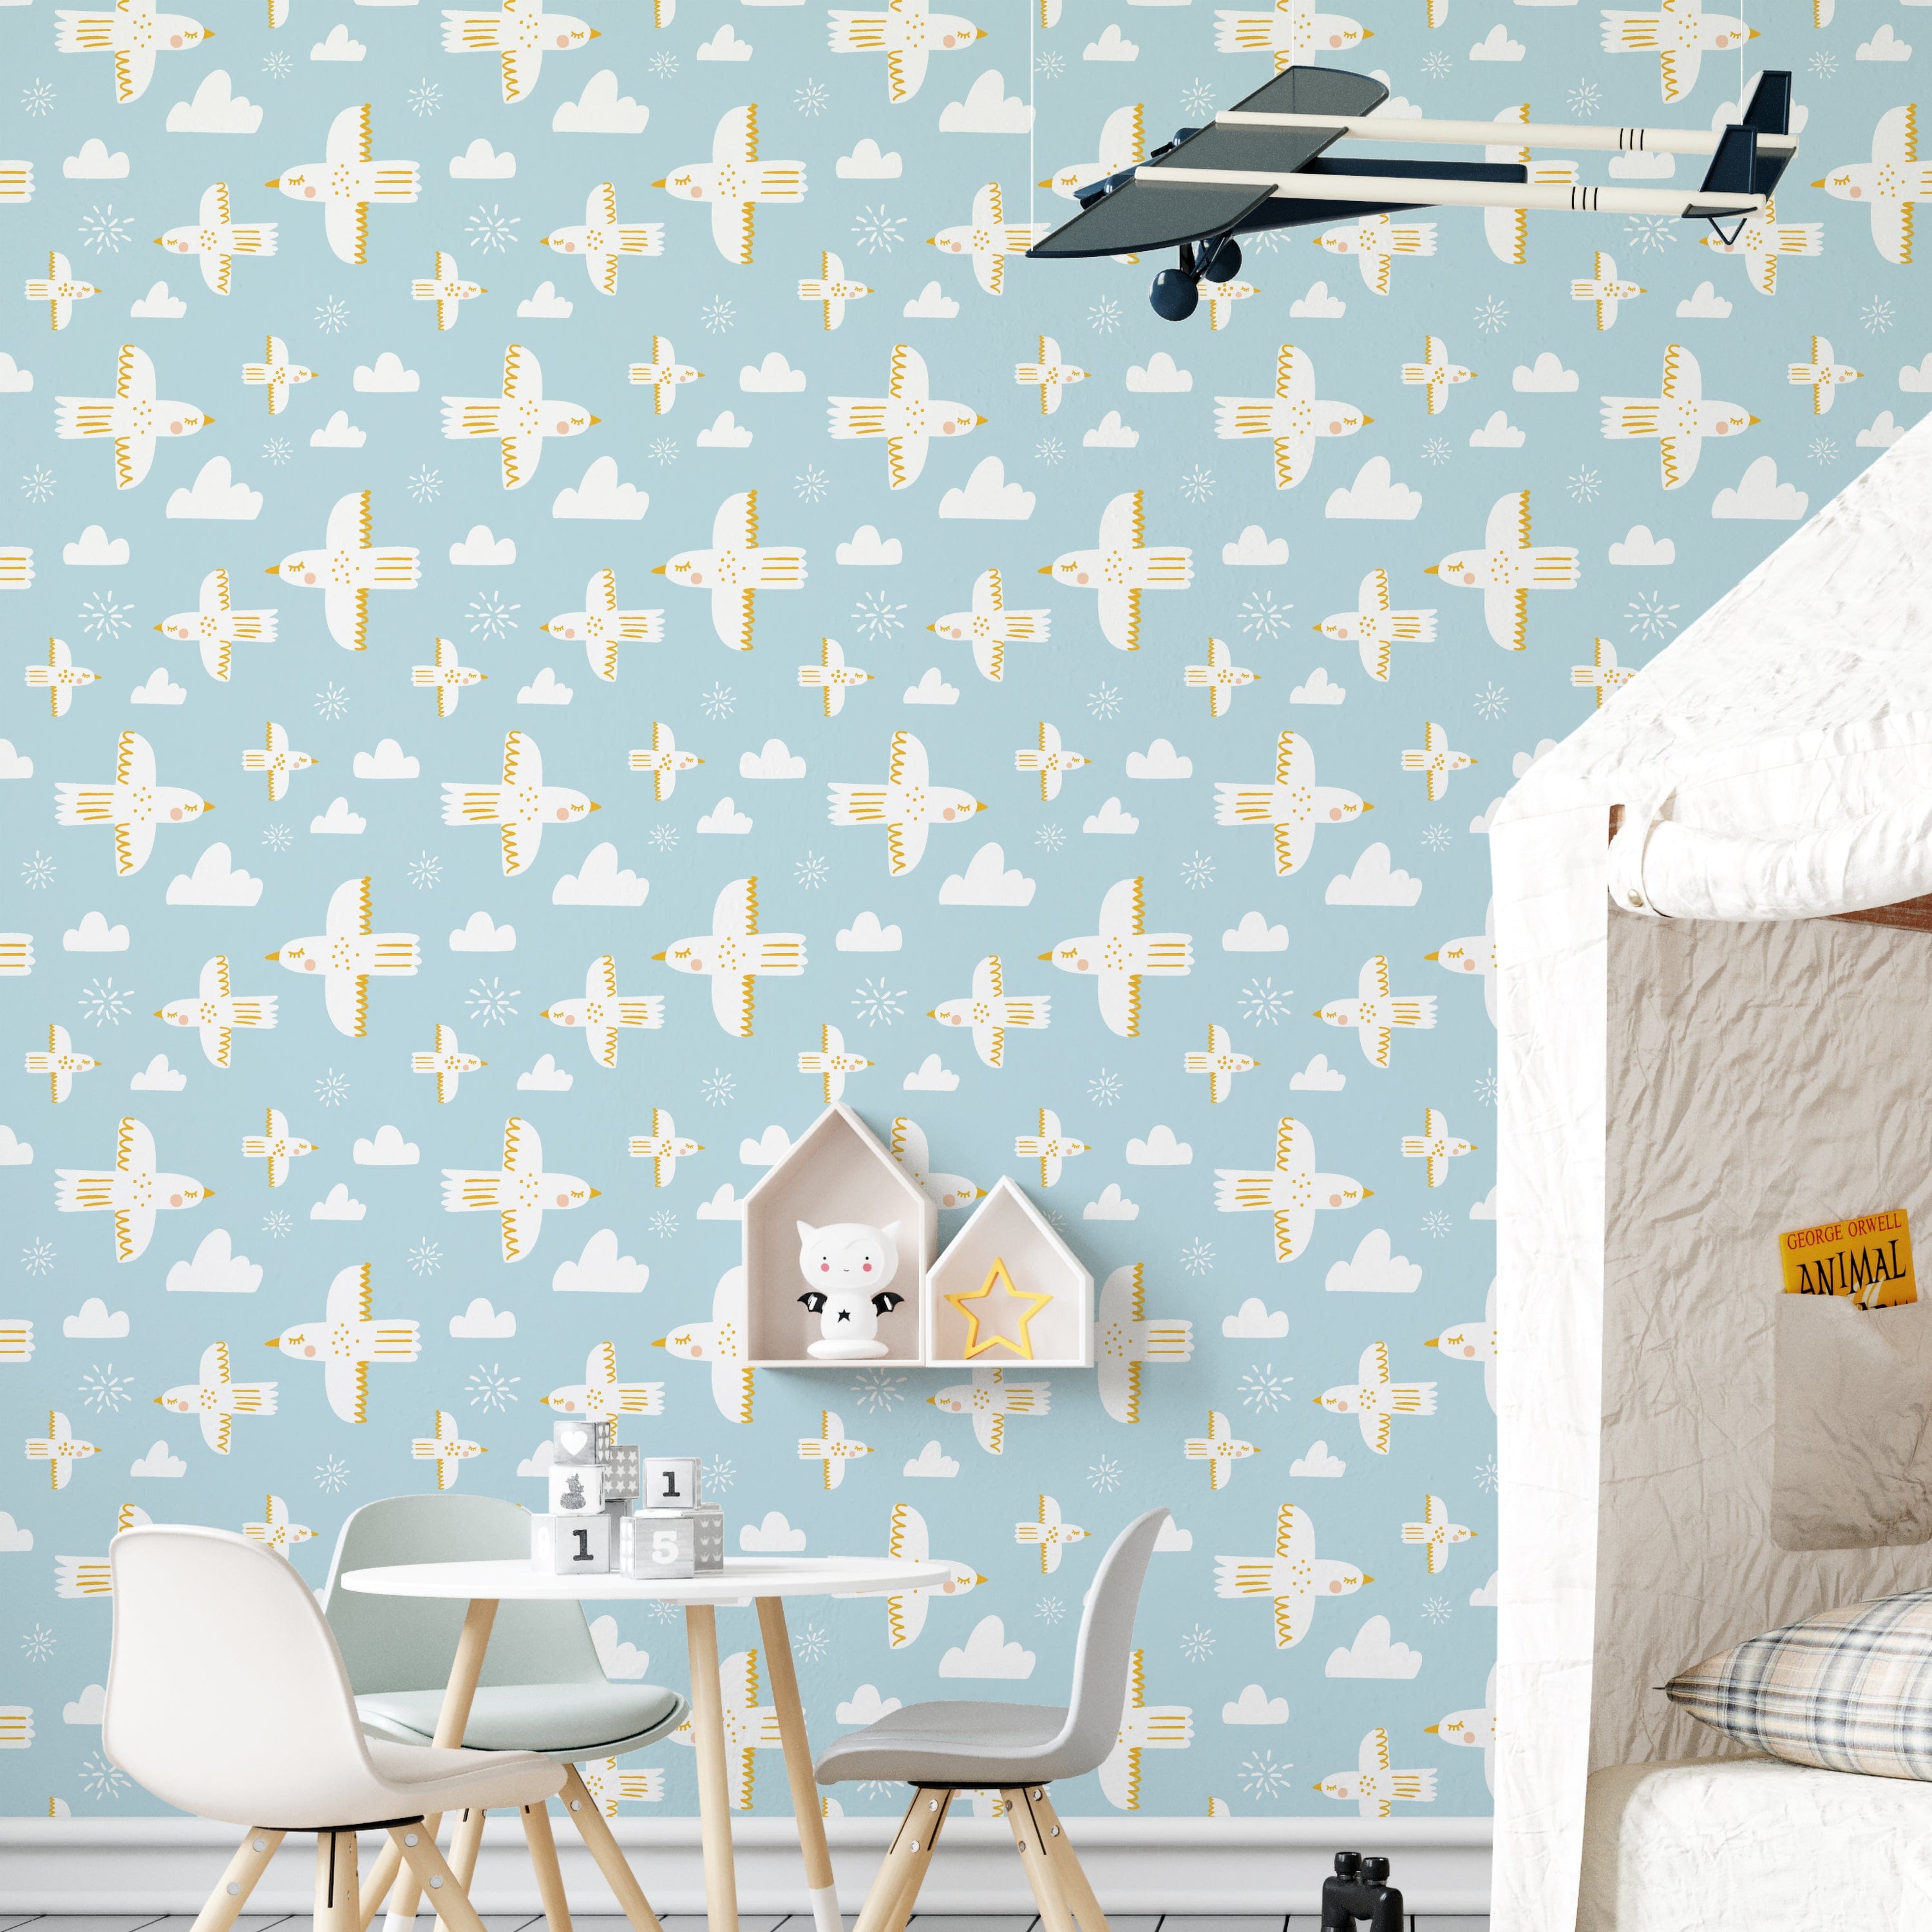 A children's playroom wall covered with Spring Sky Wallpaper showcasing playful white birds flying amongst clouds and stars on a serene blue background, enhancing the room's cheerful and airy feel